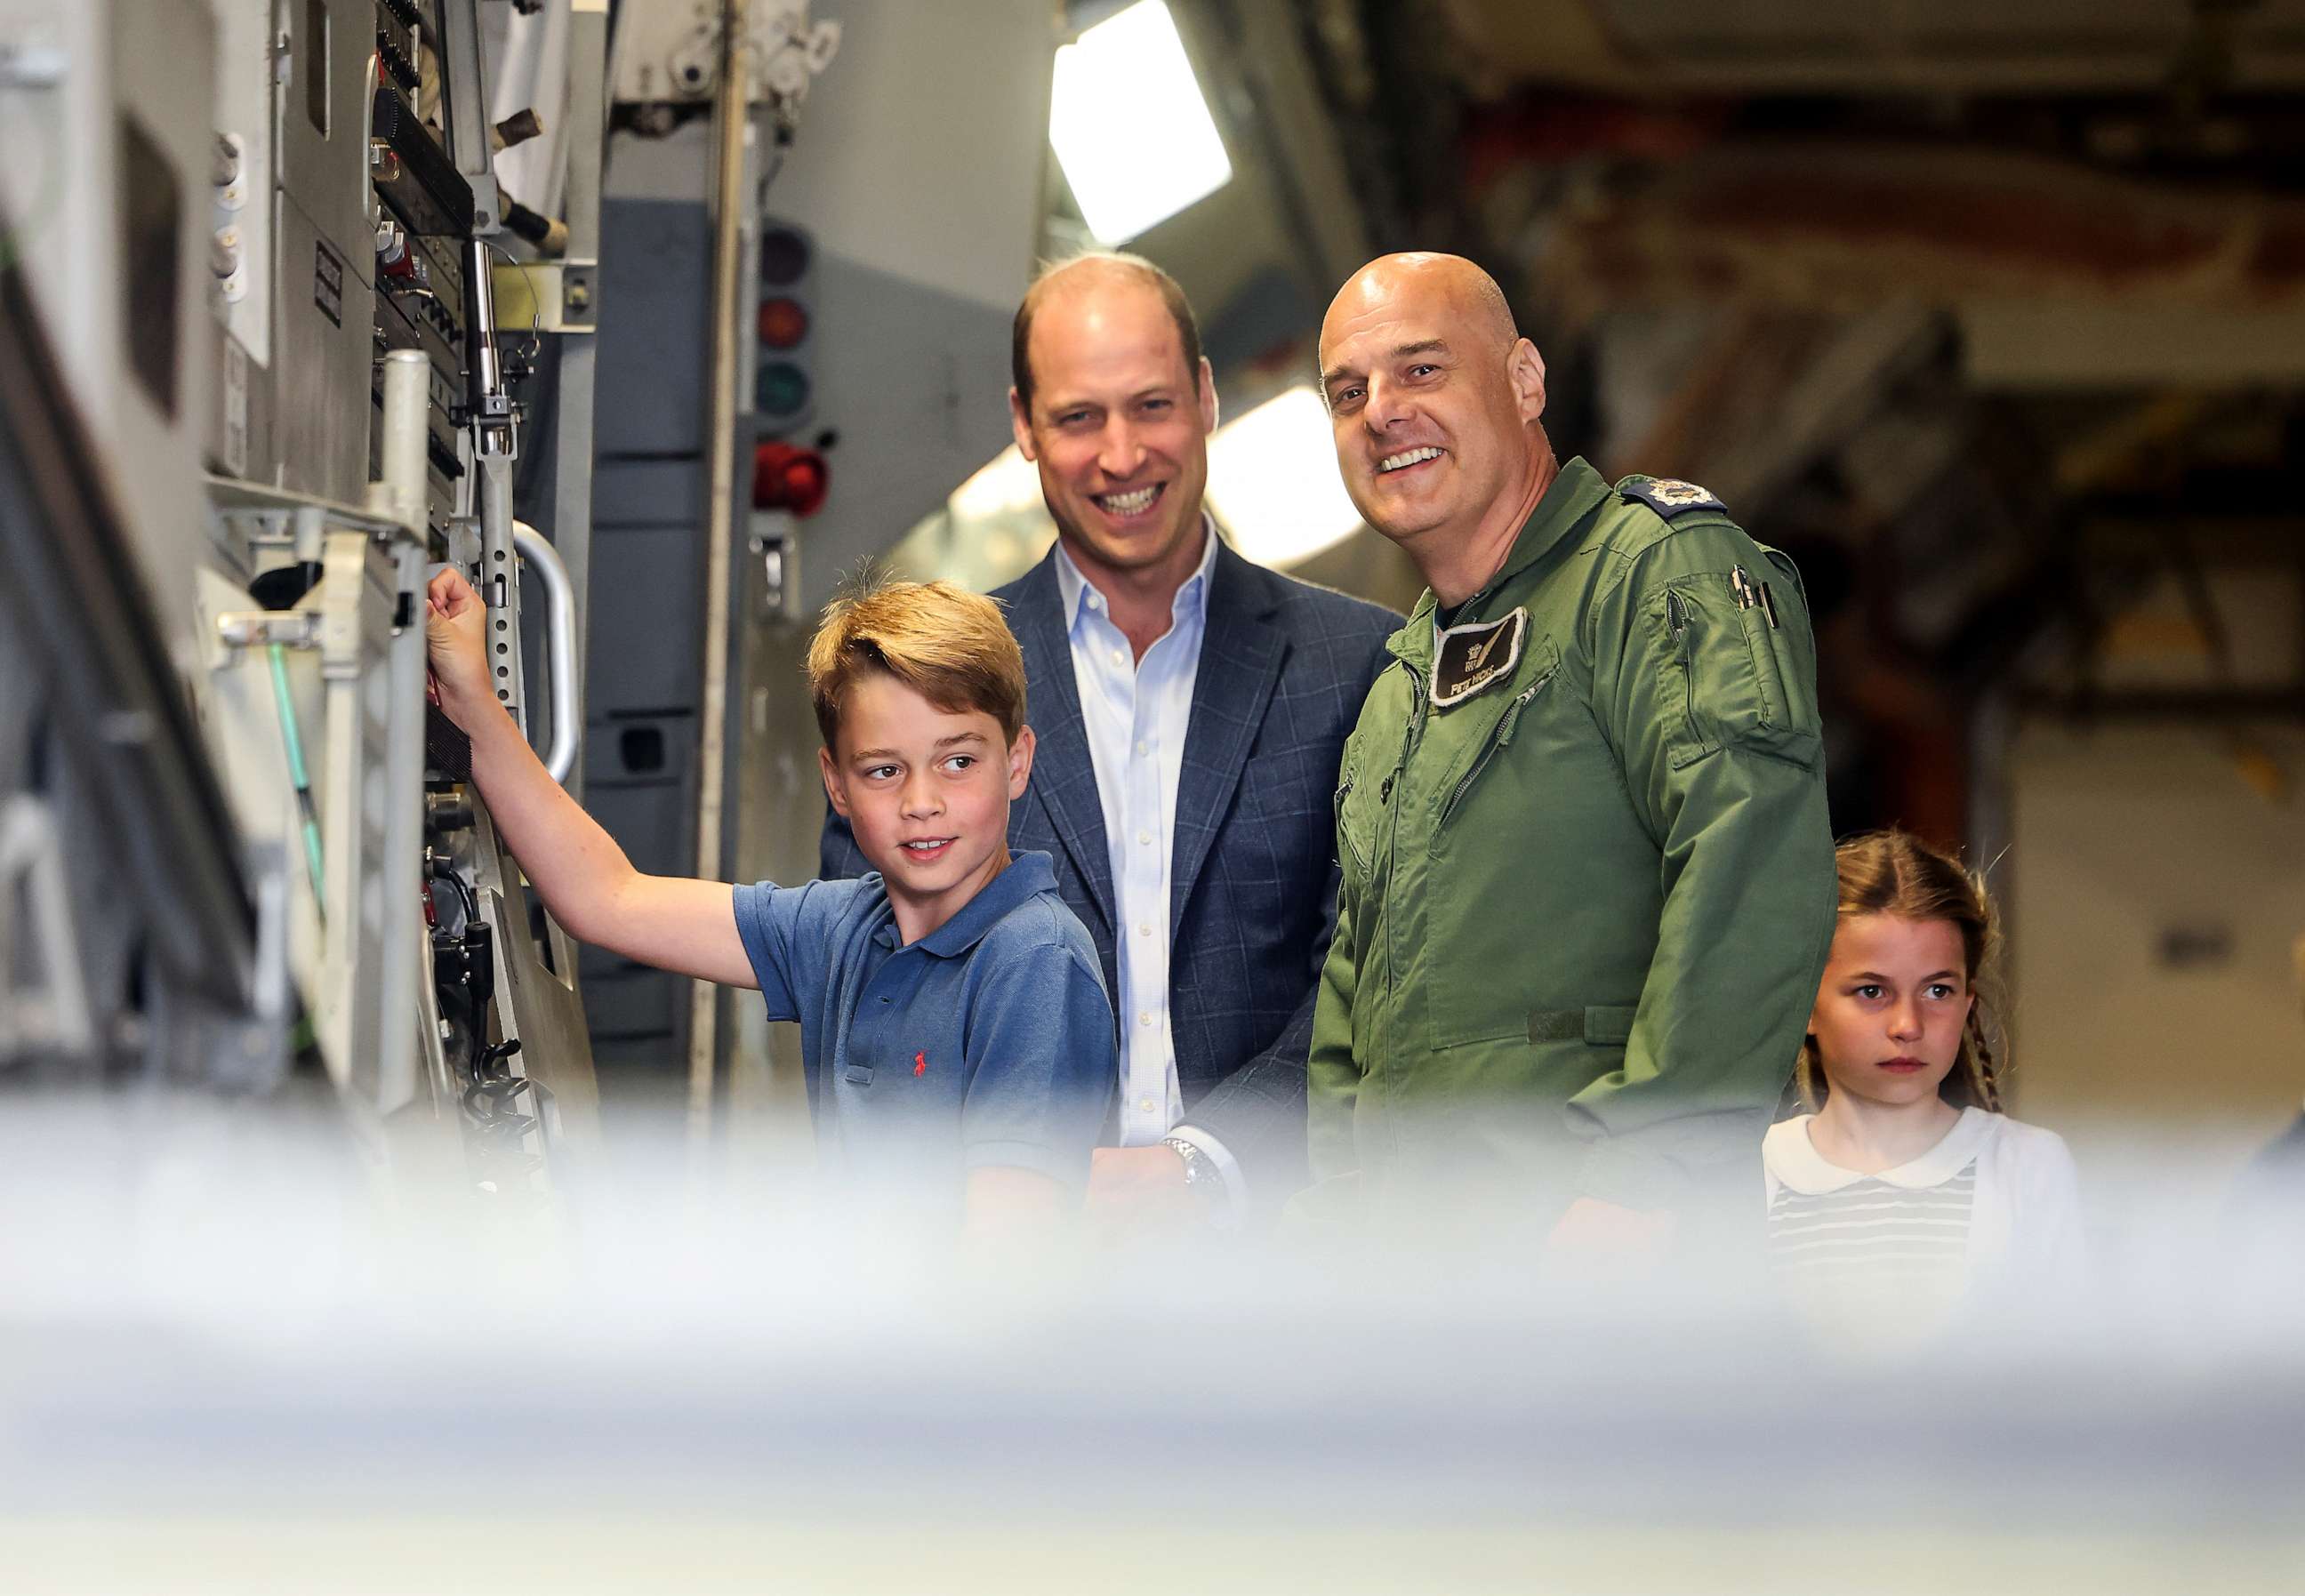 PHOTO: Prince George of Wales raises the ramp on the C17 plane during the visit to the Air Tattoo at RAF Fairford with Prince William, Prince of Wales and Princess Charlotte of Wales on July 14, 2023 in Fairford, England.